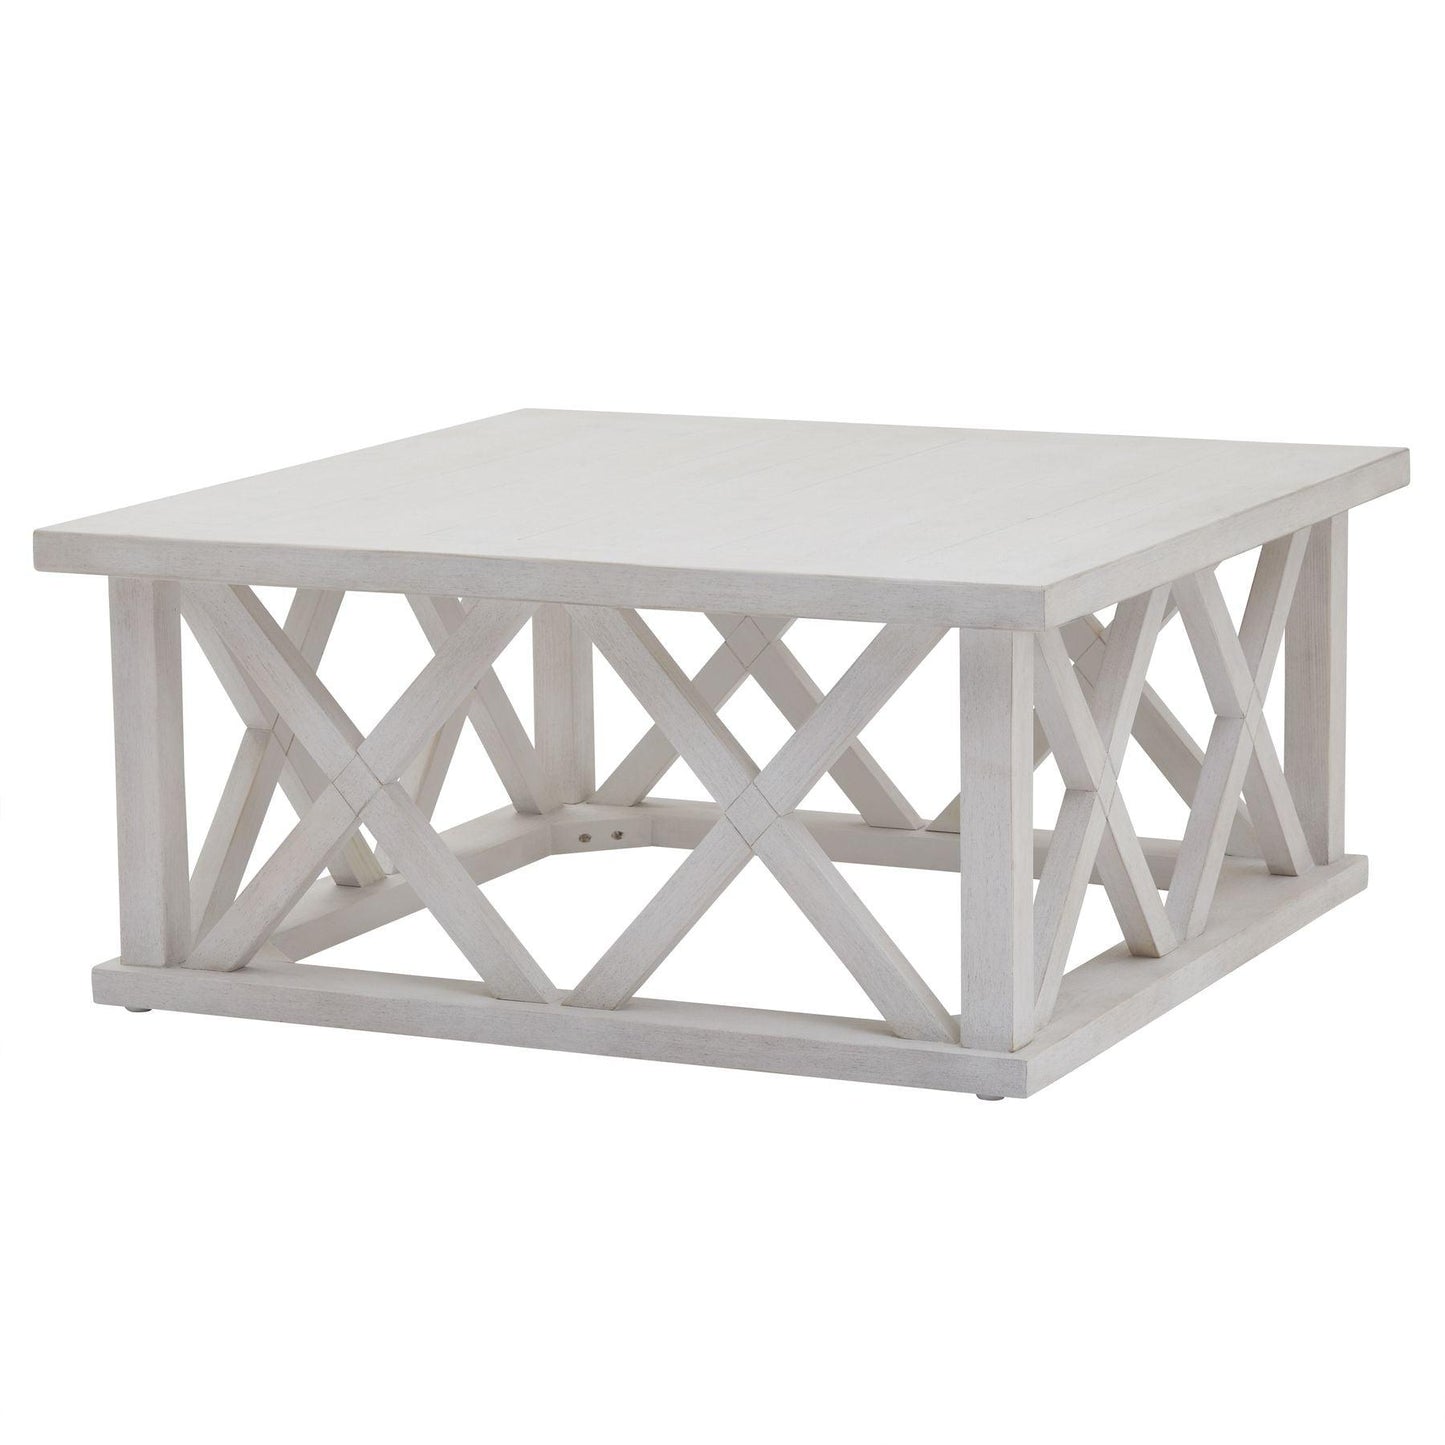 Stamford Plank Collection Square Coffee Table - Abode Decor